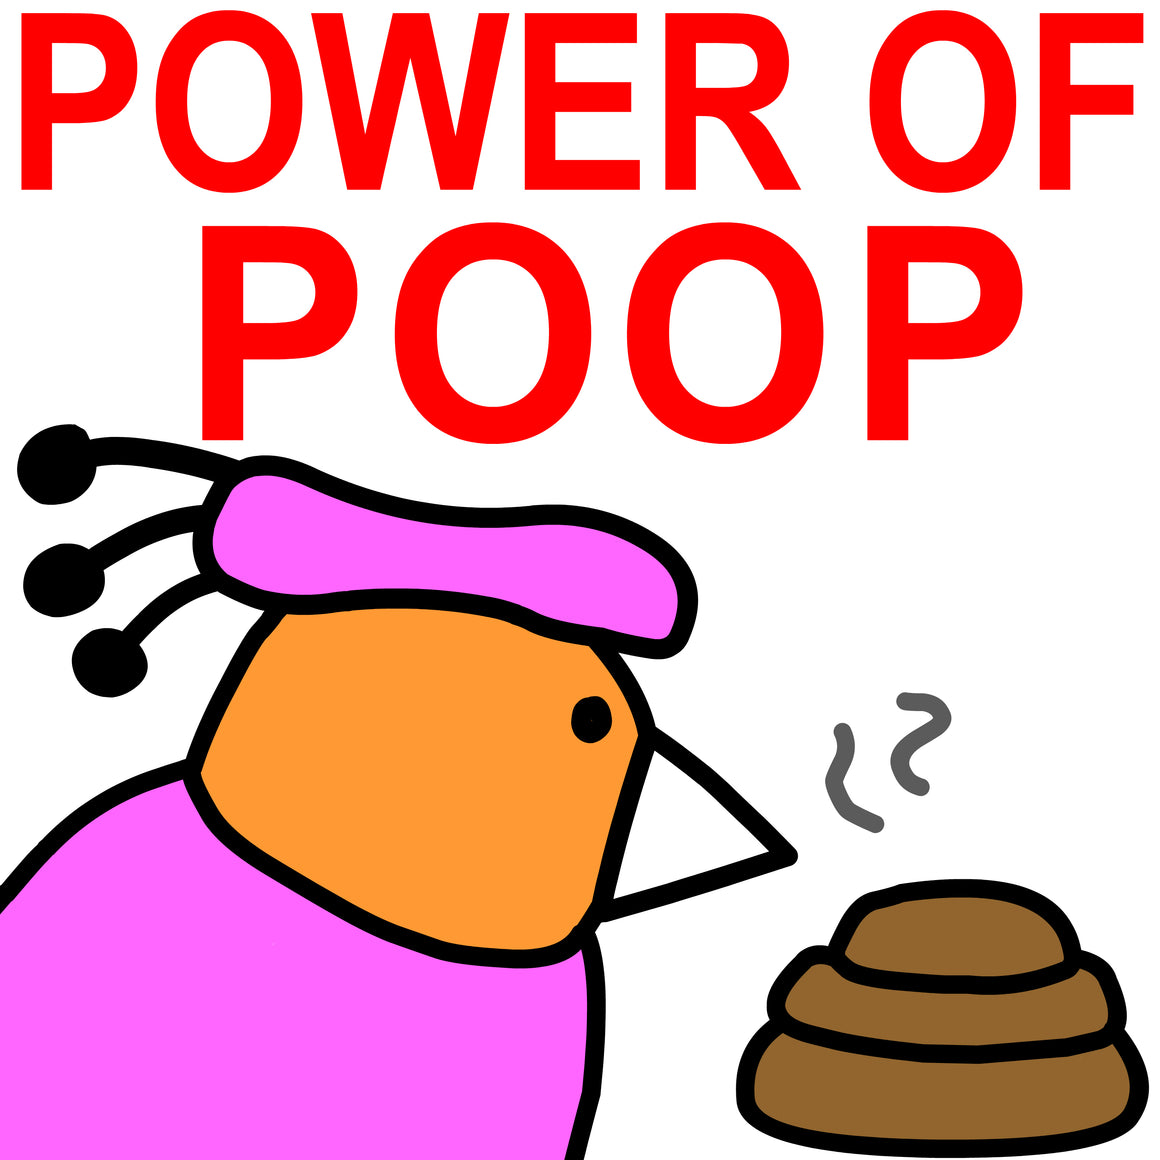 Power of Poop - ringtone by Suzanne